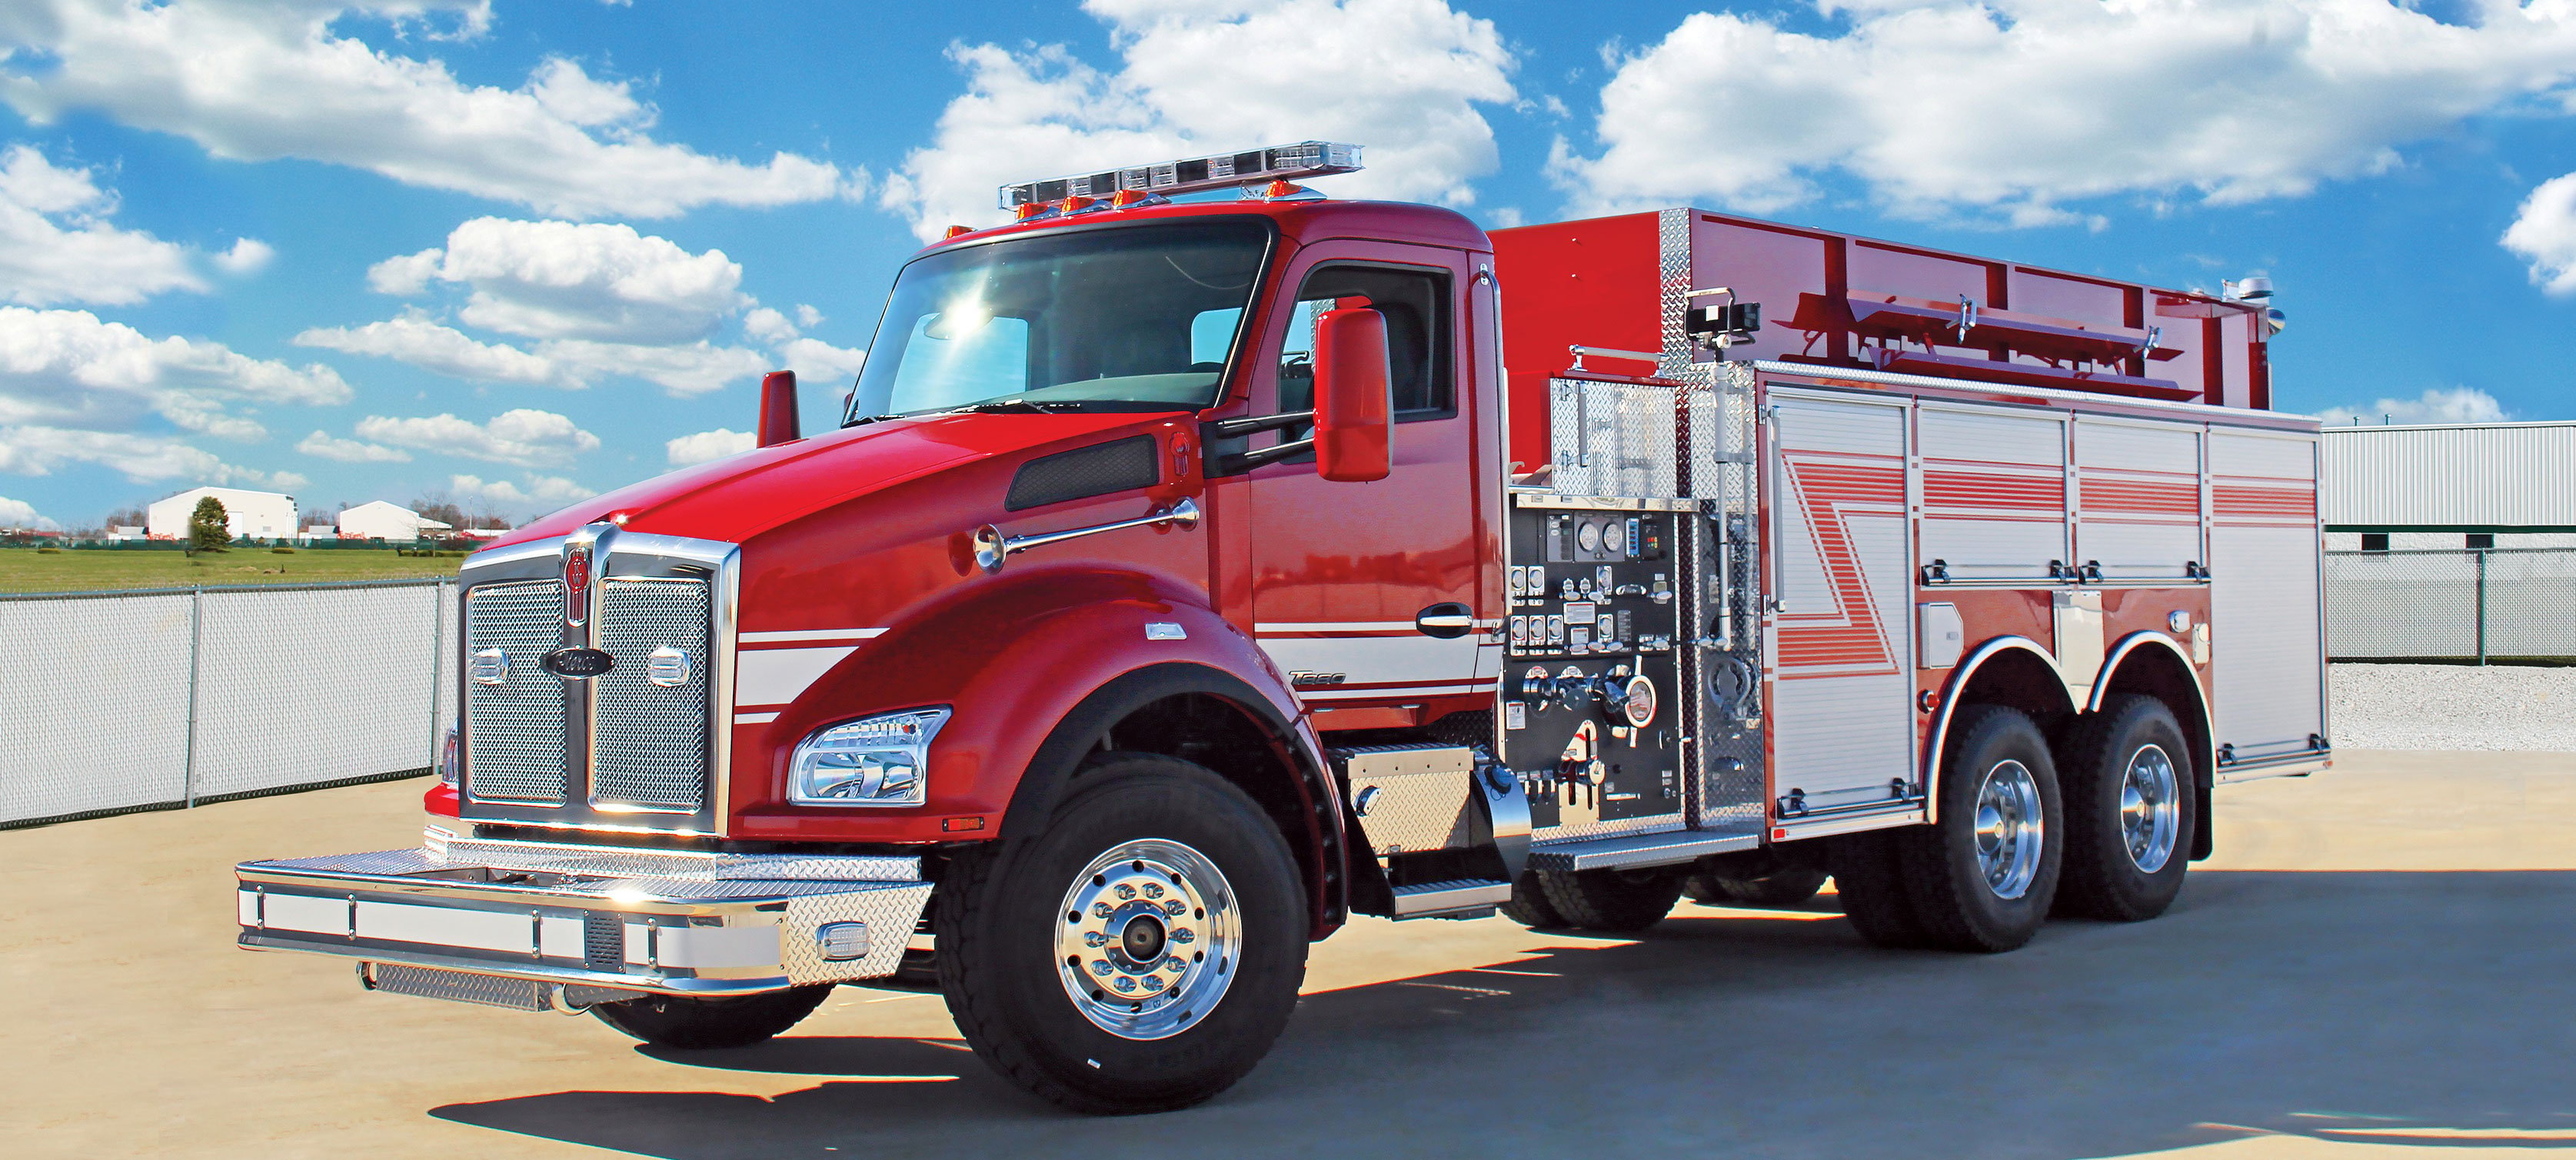 Pierce Kenworth Commercial Fire Truck Chassis